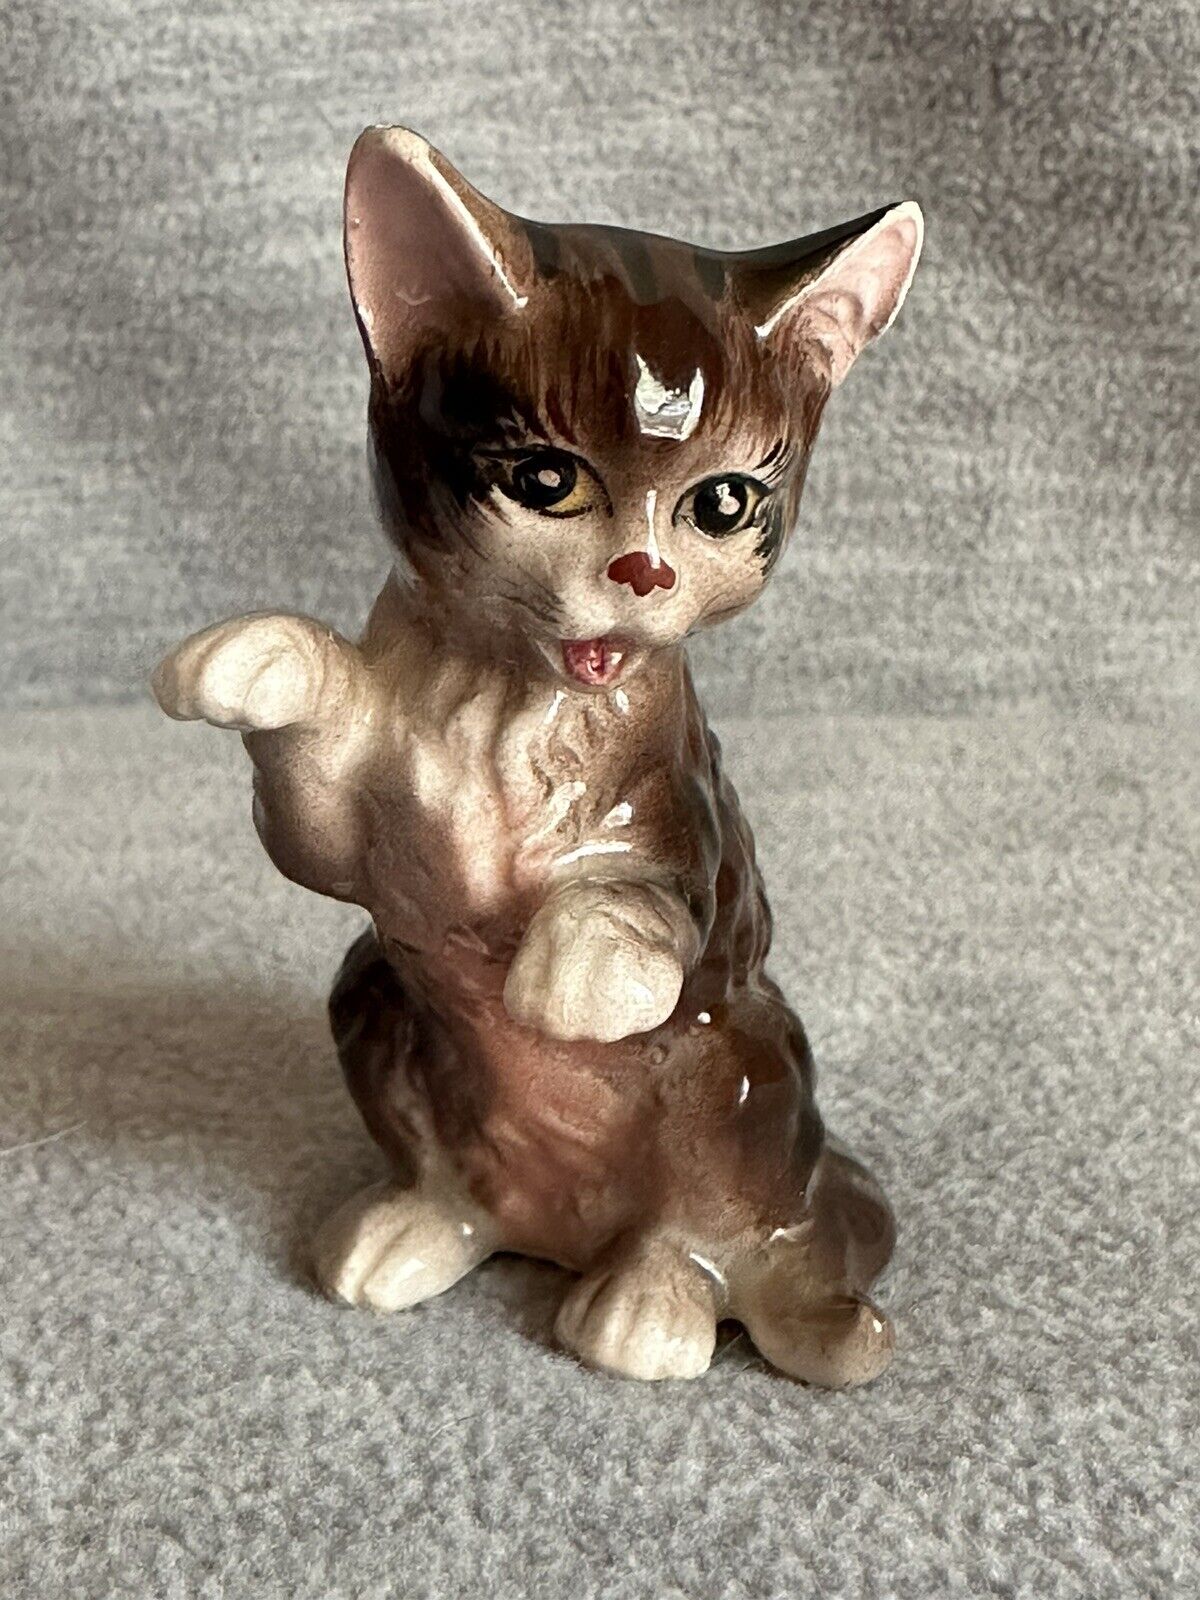 Vintage Little Kitten Figurine Brown Tiger Tabby With Pink Belly And Ears Japan